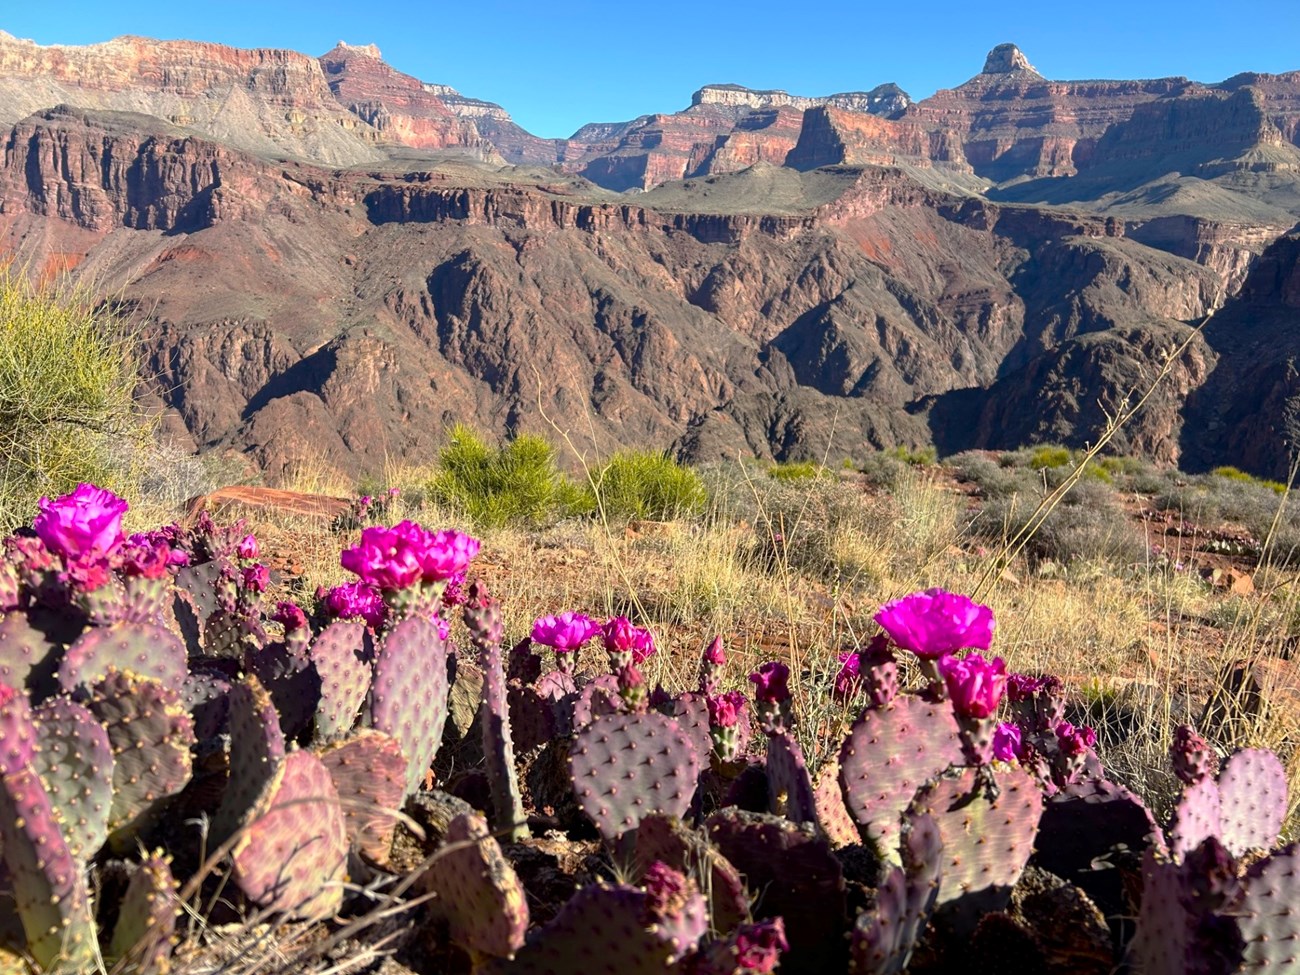 On a flat terrace cacti pads with a purple tint, their edges covered with bright purple-pink flowers, with canyon cliffs and peaks rising in the distance.